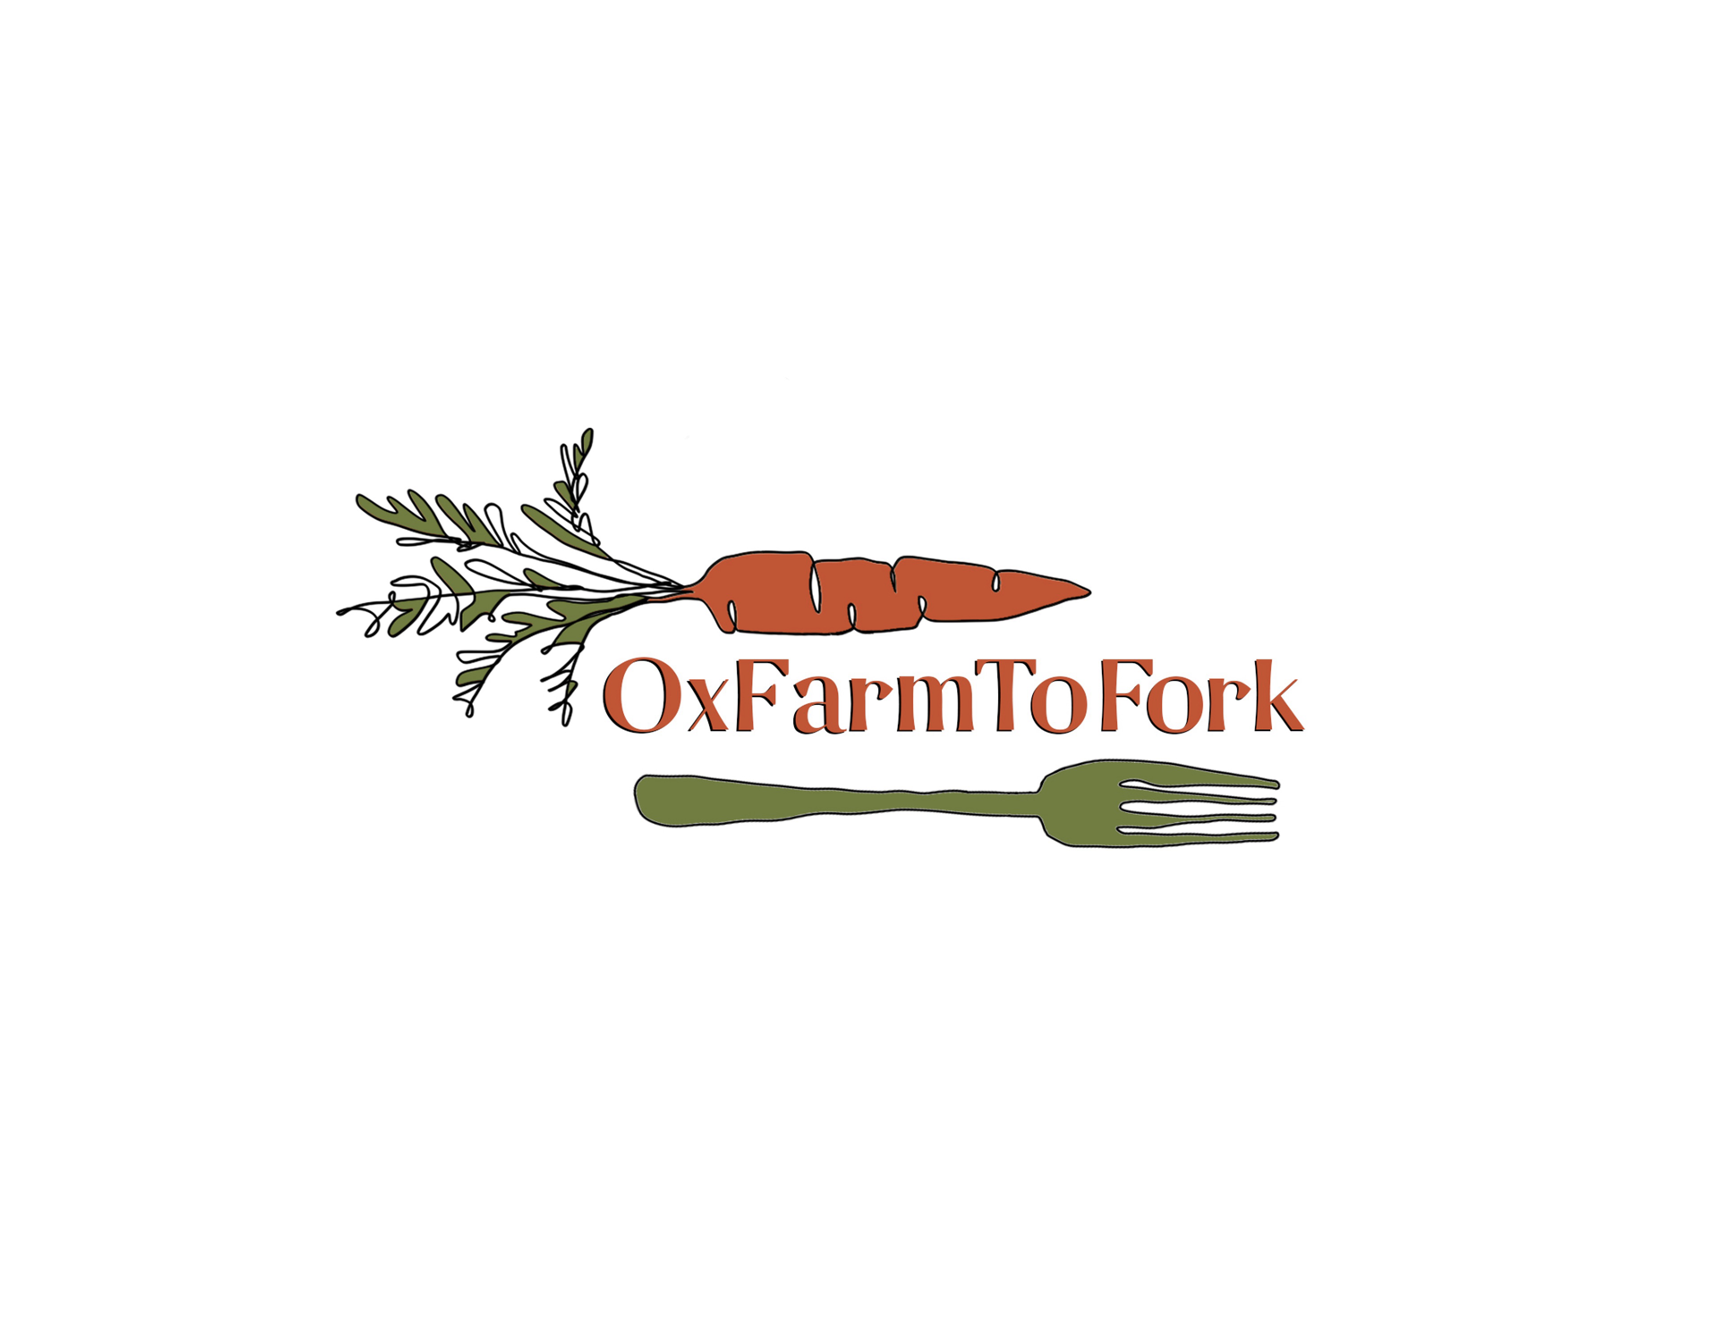 OxFarm2Fork logo with a carrot above the name and a form below it